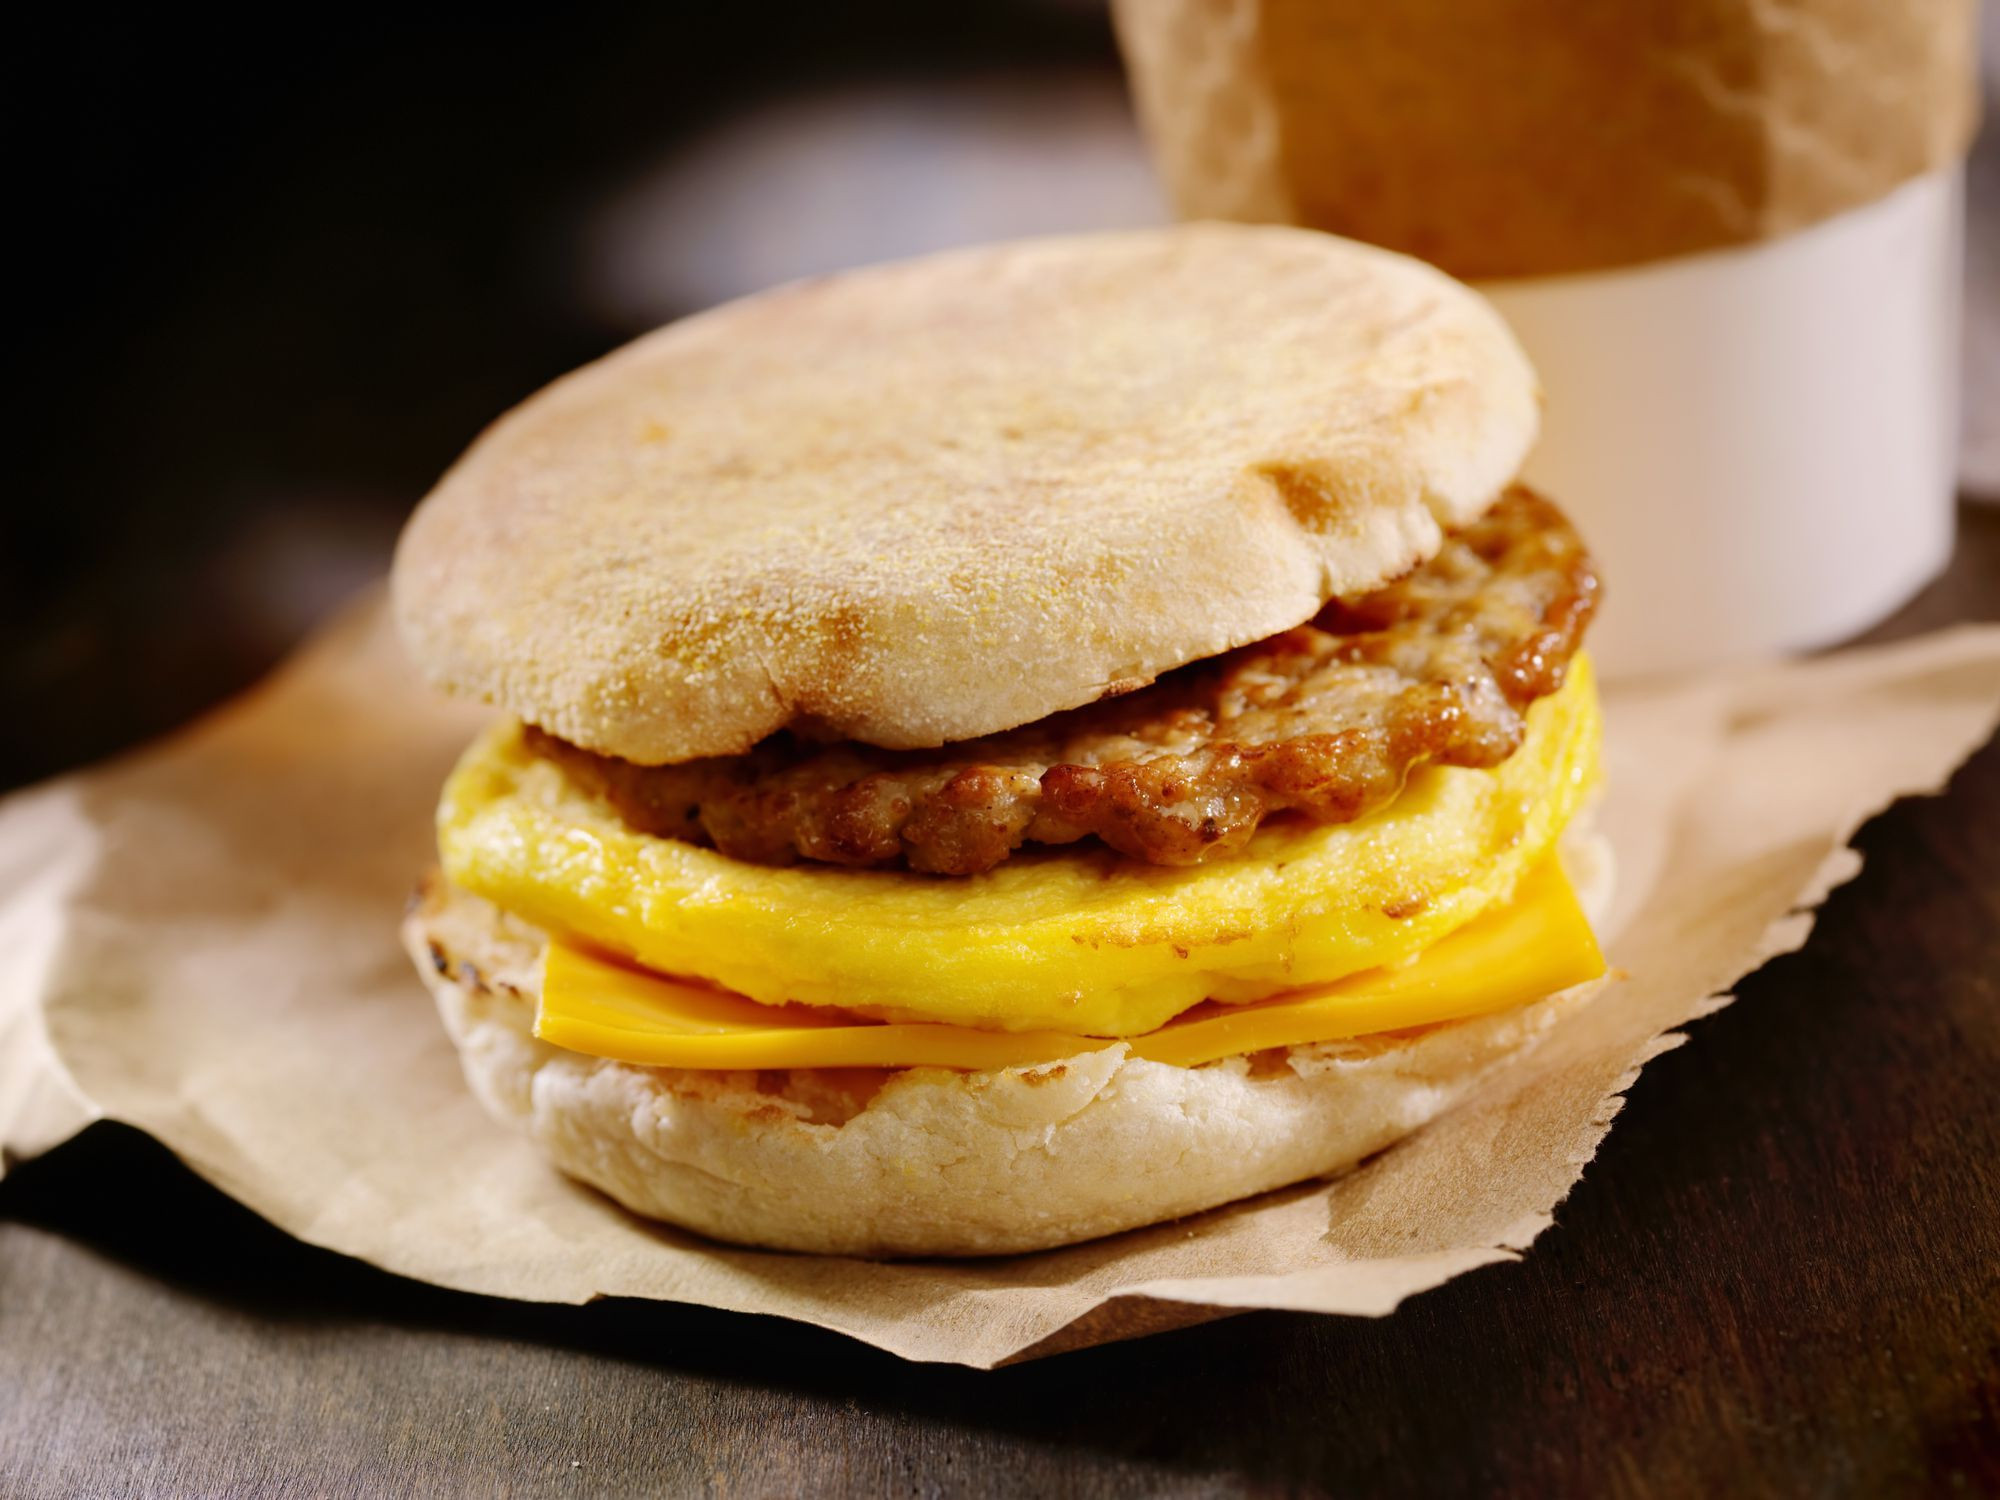 Healthy Breakfast Fast Food New The Healthiest Breakfast Options At Taco Bell Mcdonalds Of Healthy Breakfast Fast Food 